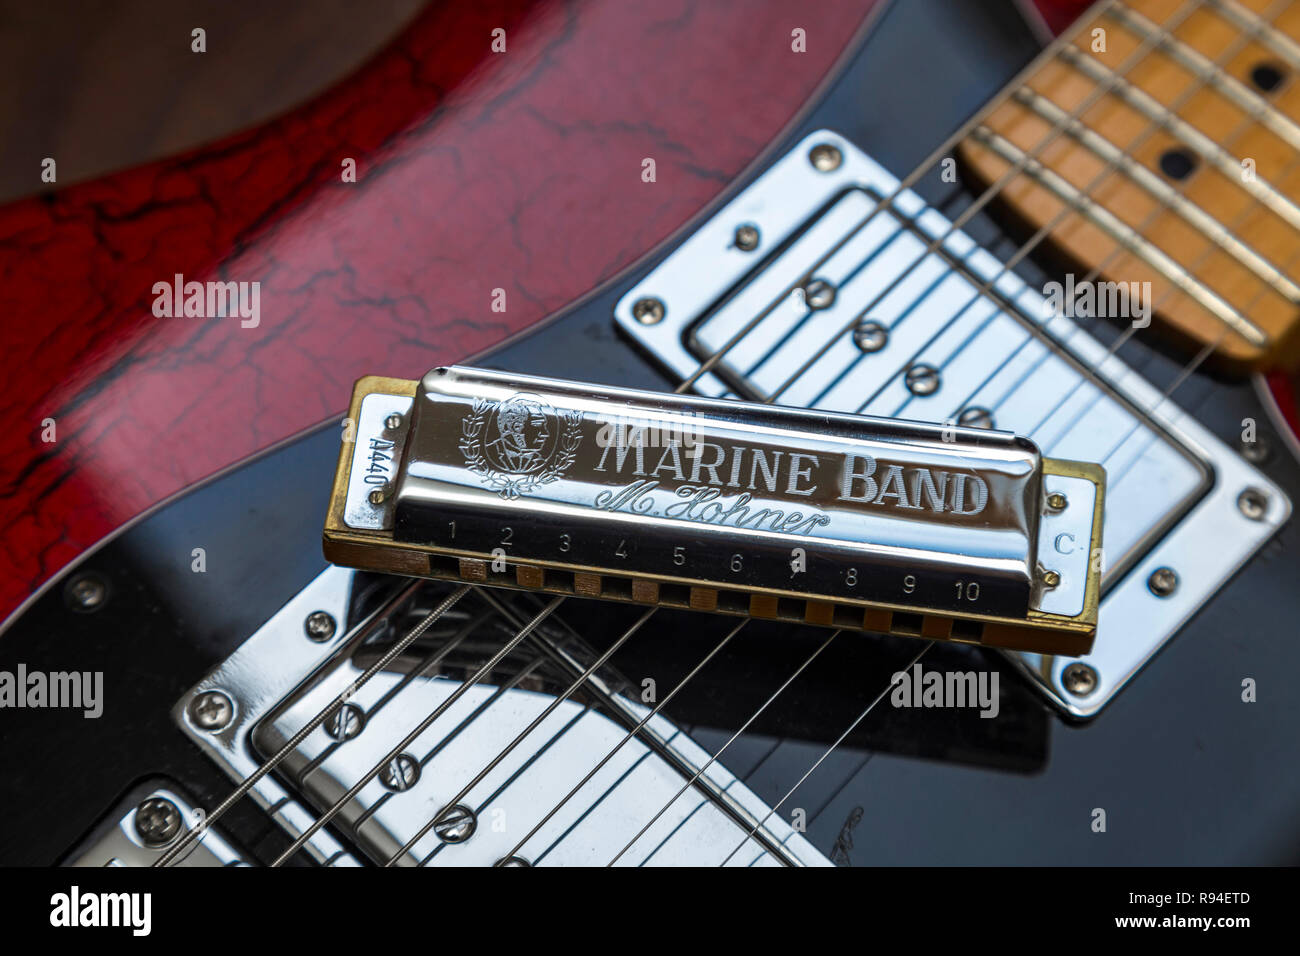 Hohner Marine Band harmonica on an old electric guitar. Blues, rock music  Stock Photo - Alamy